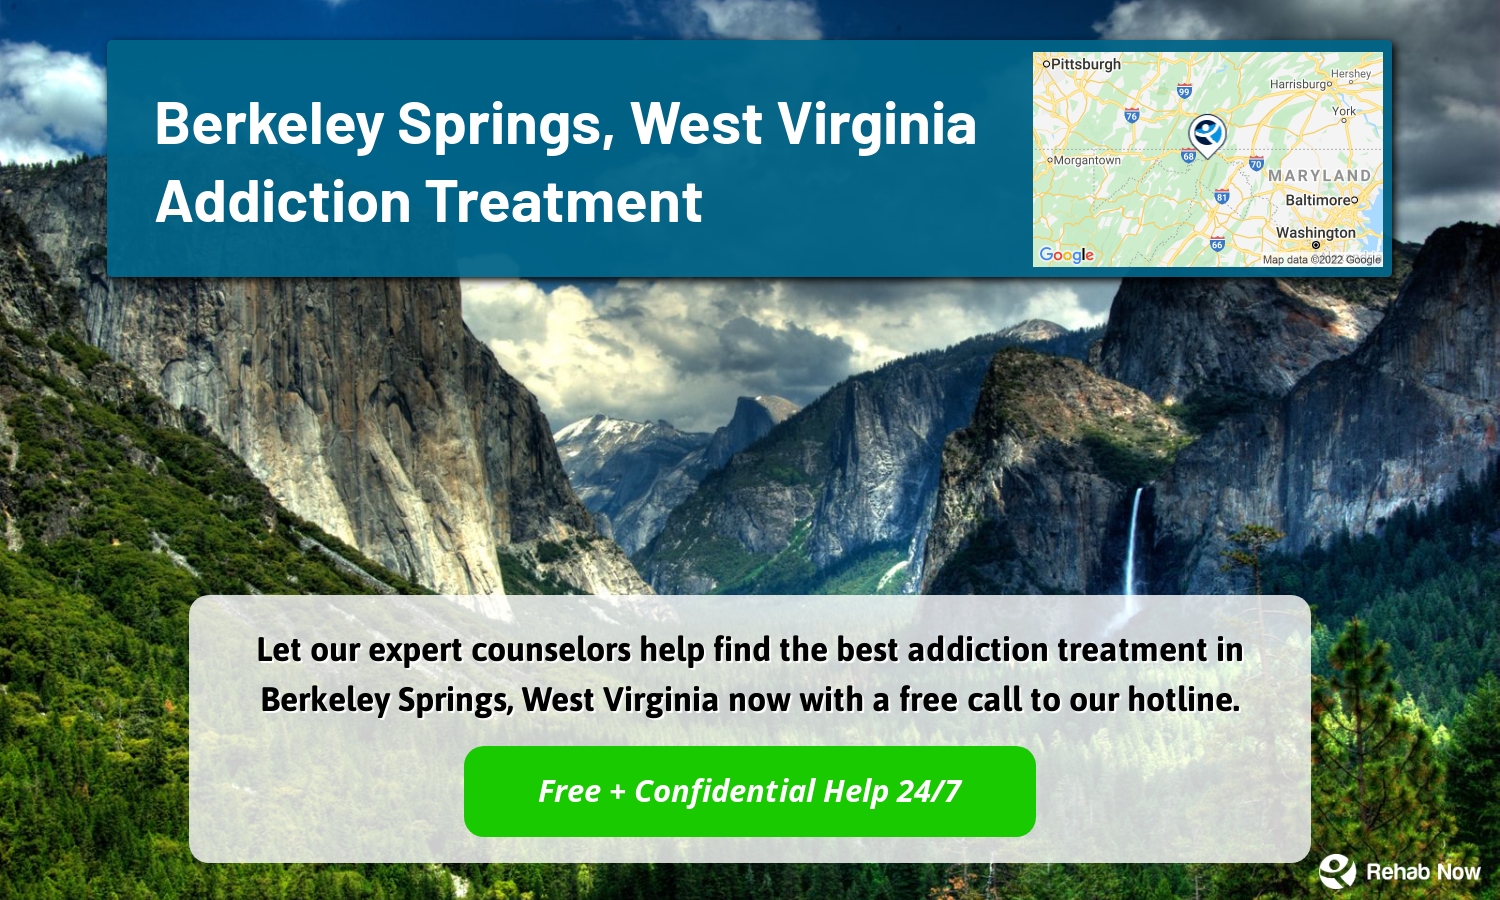 Let our expert counselors help find the best addiction treatment in Berkeley Springs, West Virginia now with a free call to our hotline.